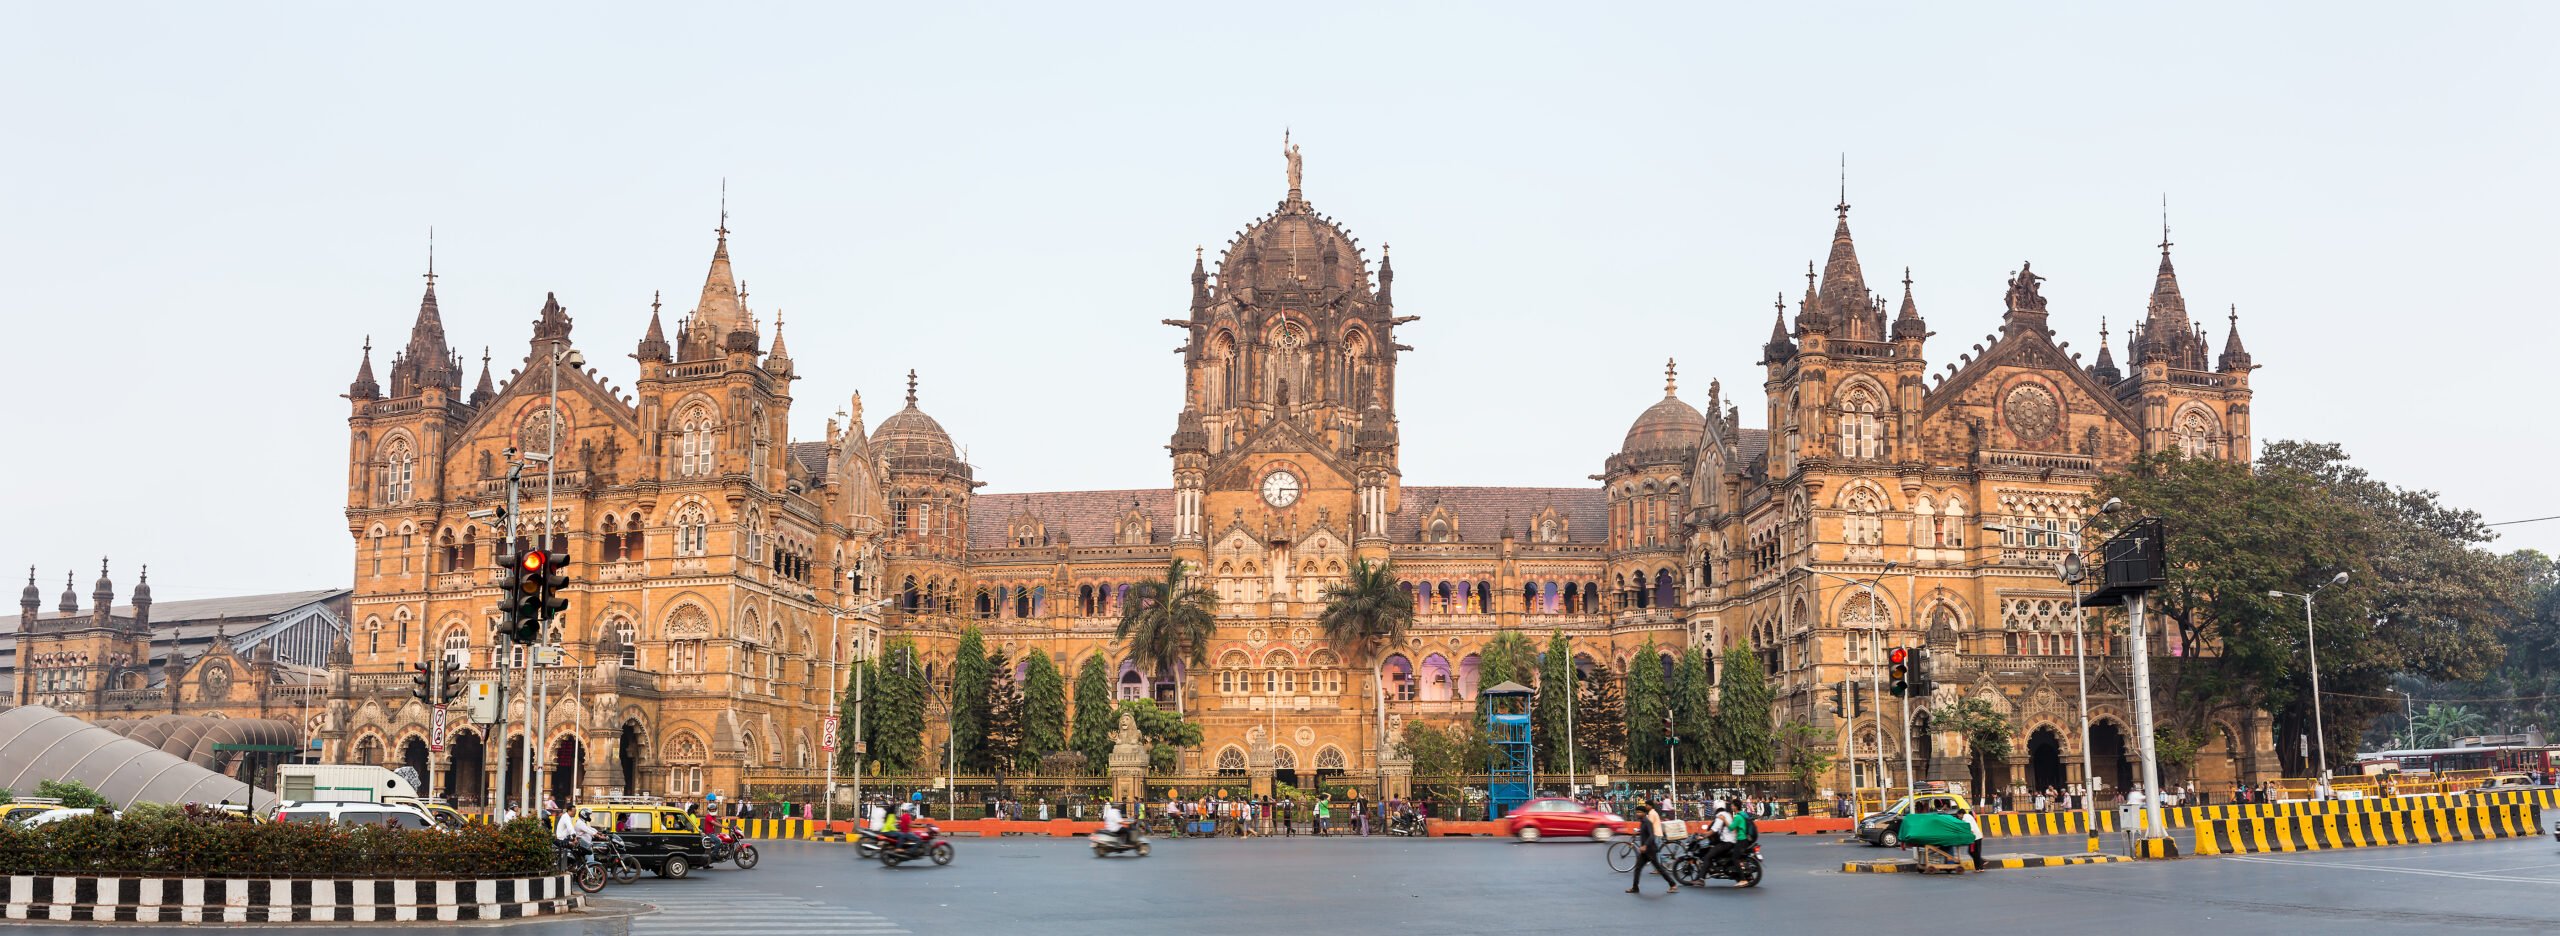 Walk Past Mumbai's Magnificent Buildings Built In Gothic & Art Deco Style In Our Mumbai's Gothic And Art Deco Tour